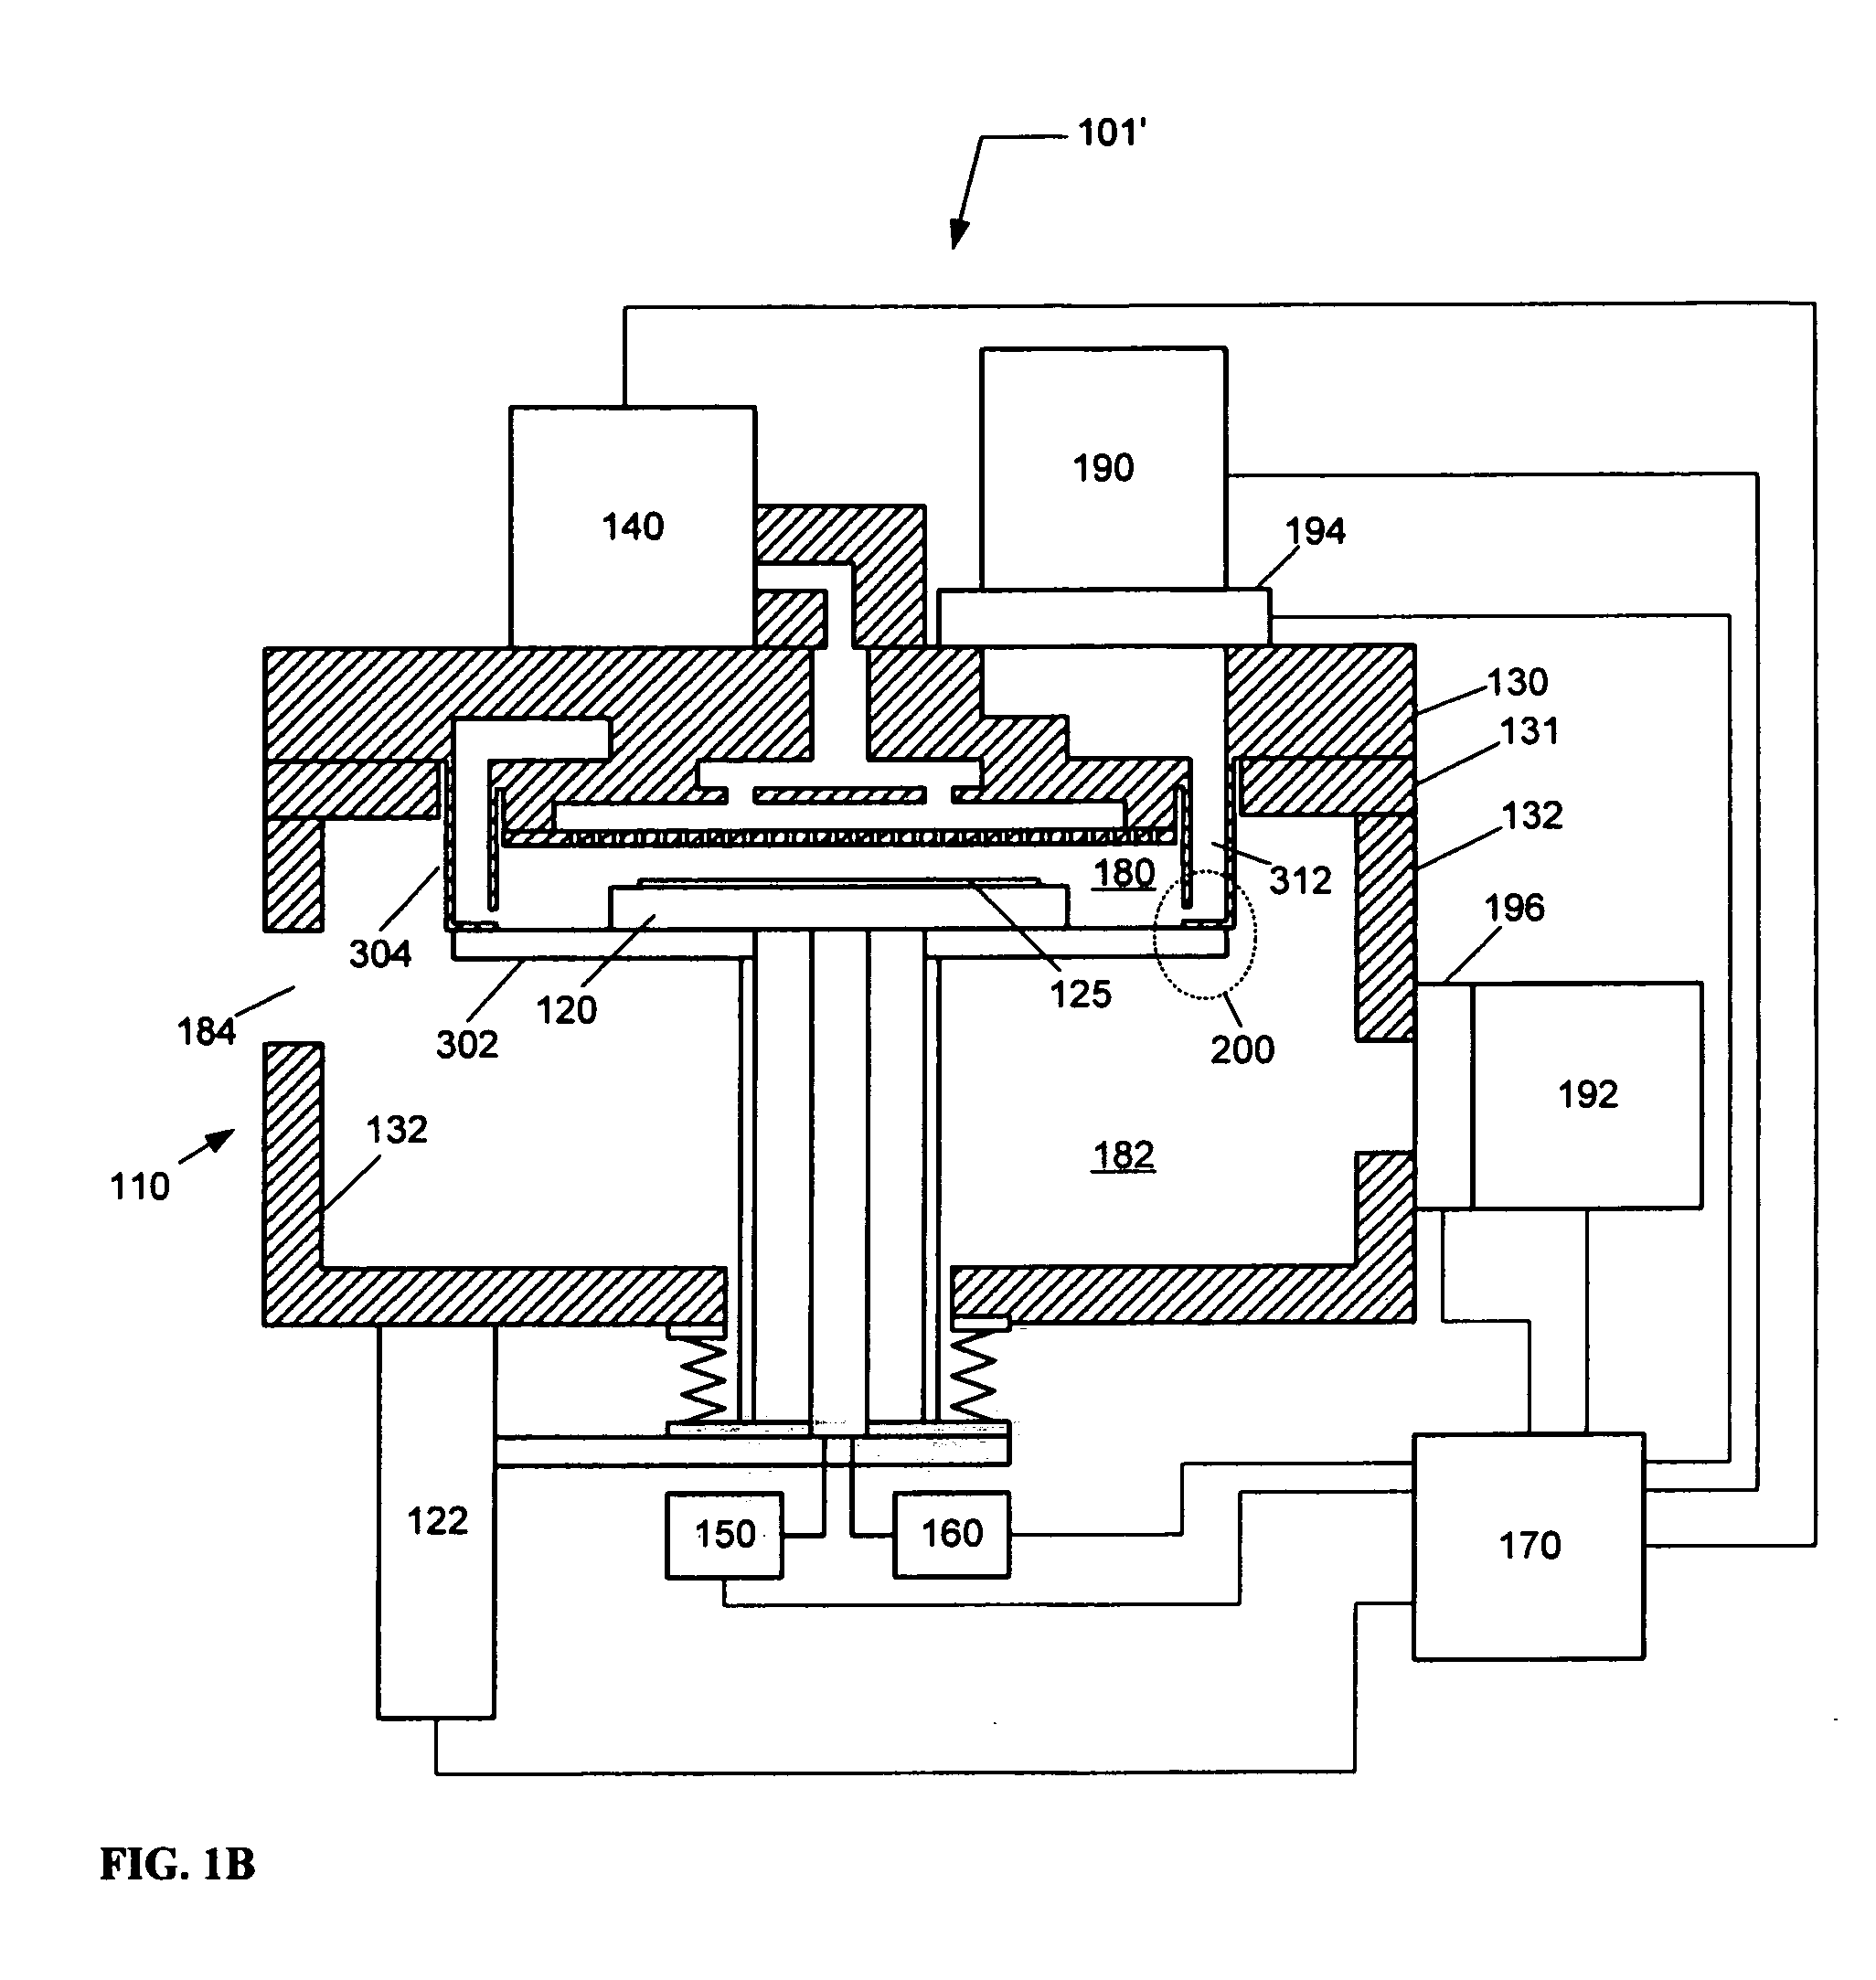 Exhaust apparatus configured to reduce particle contamination in a deposition system